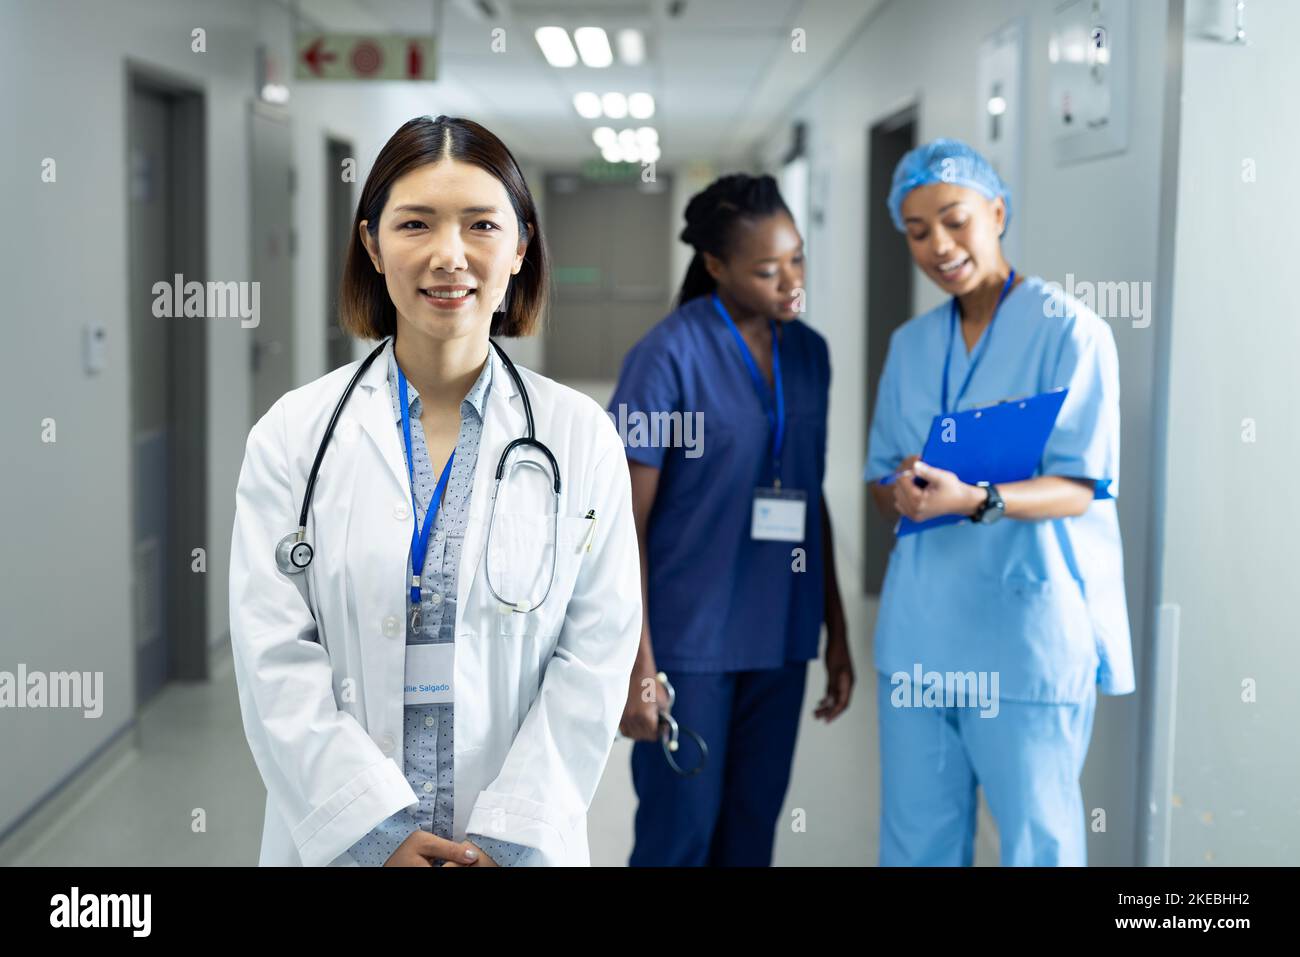 Portrait of smiling asian female doctor in hospital corridor, colleagues in background. Hospital, medical and healthcare services. Stock Photo